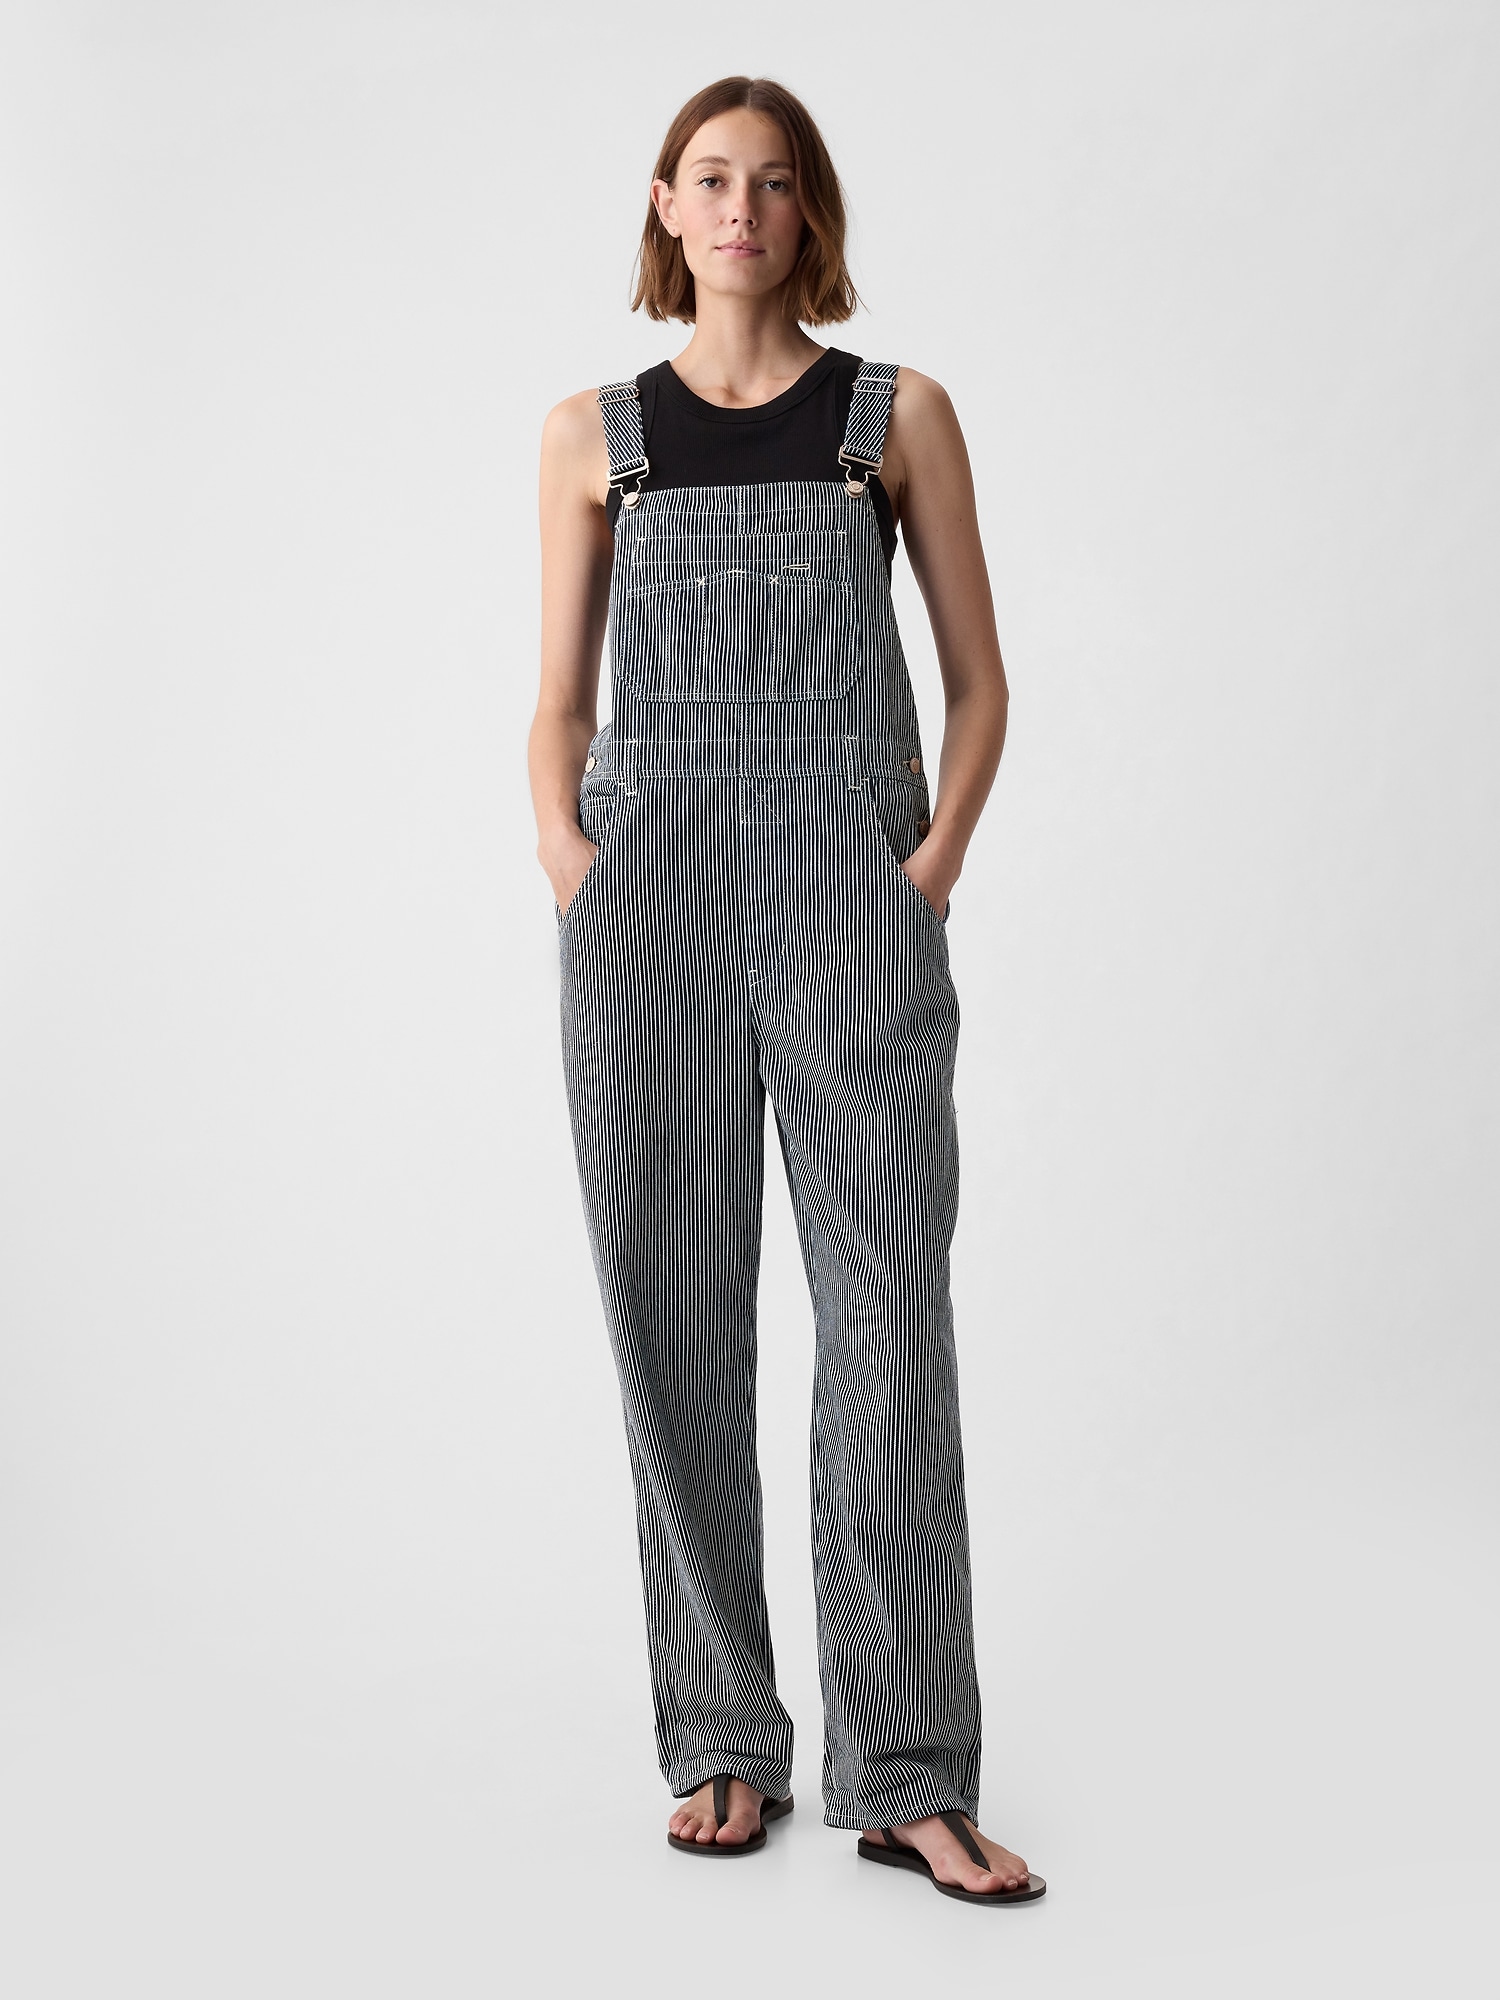 Striped Loose Overalls